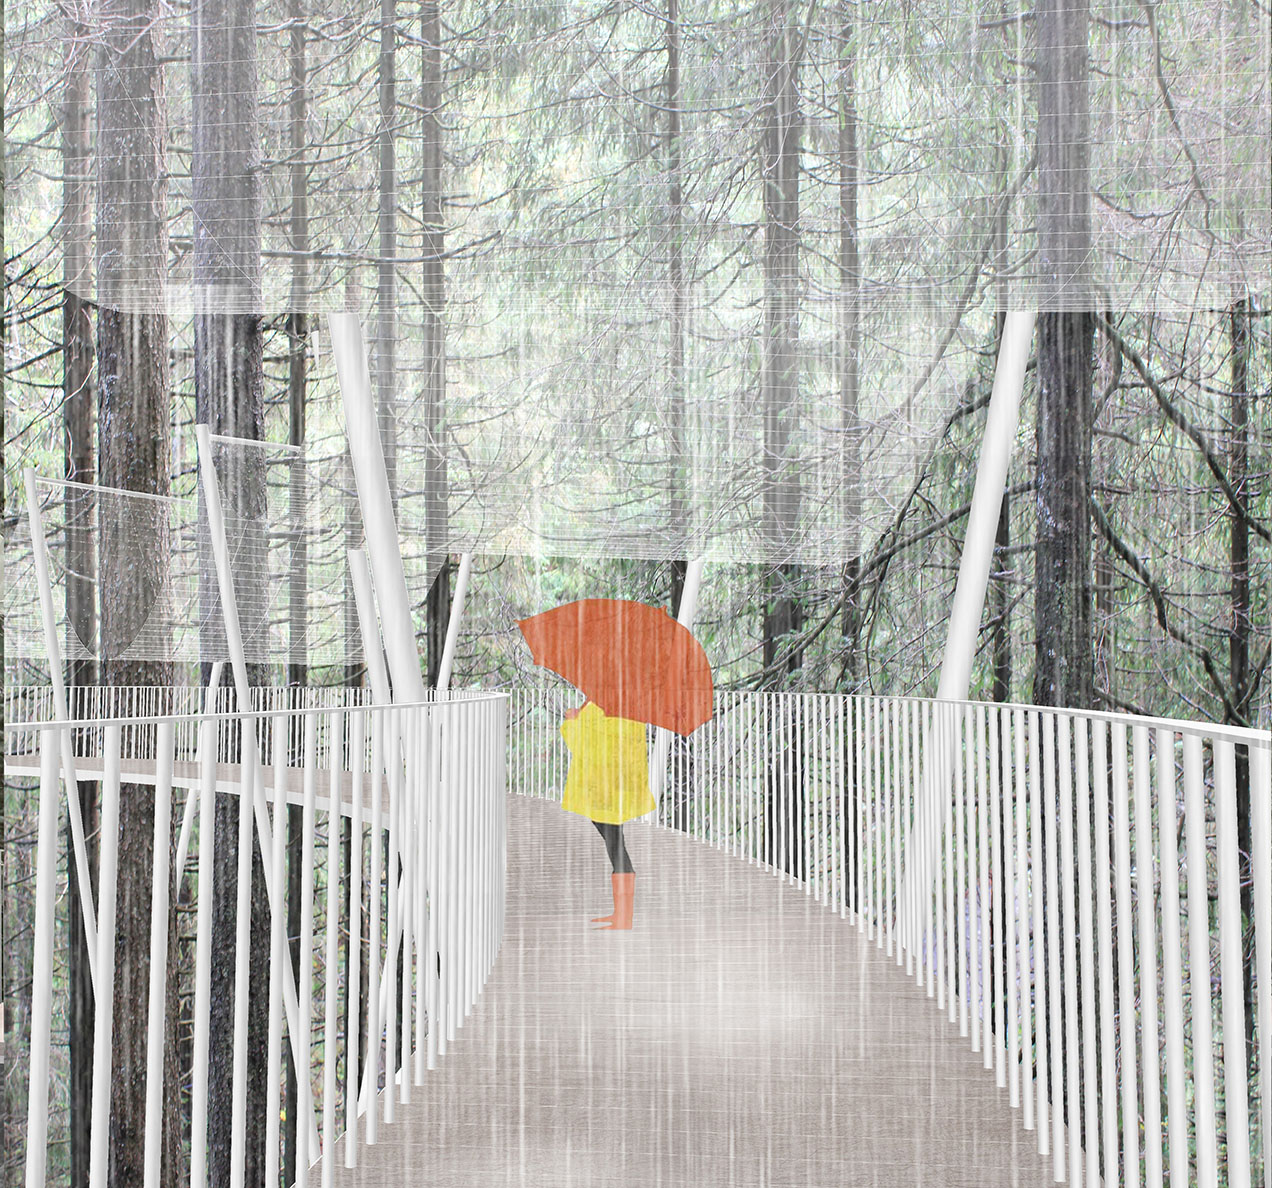 Rendering of person on the walkway in the rain